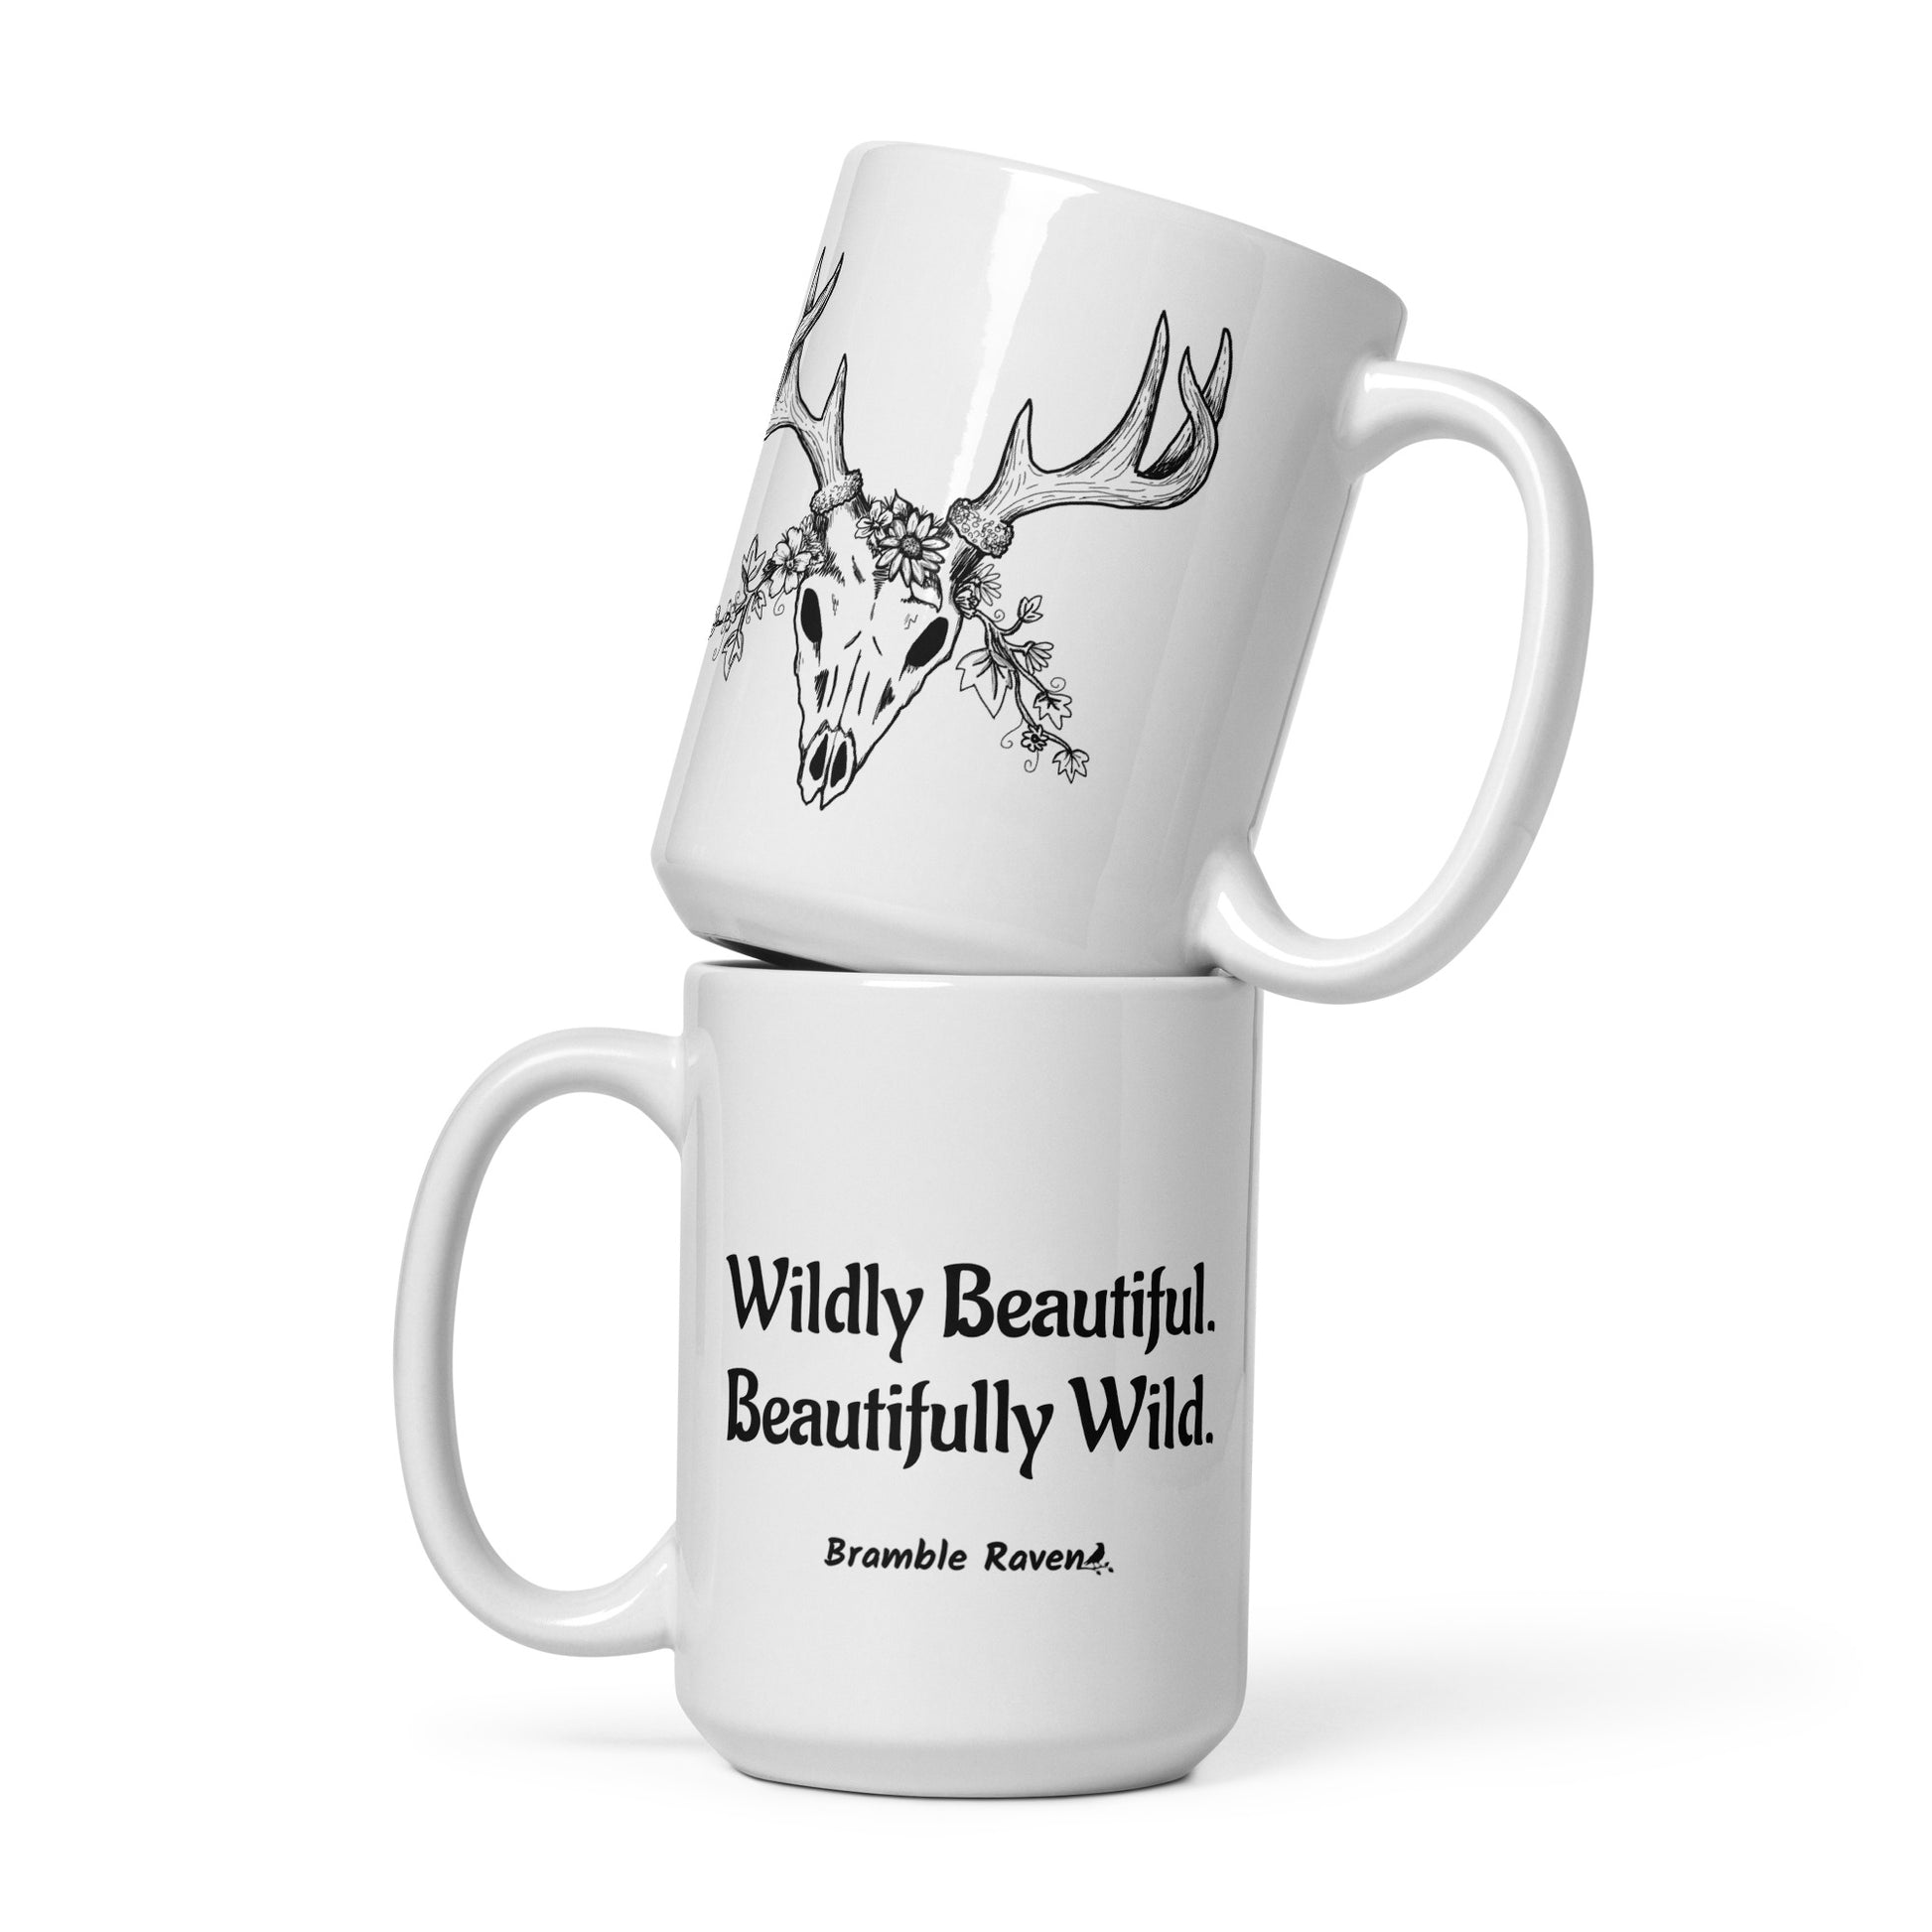 15 ounce white ceramic mug. Features hand-illustrated deer skull wreathed in flowers on one side, and text wildy beautiful, beautifully wild on the other side.